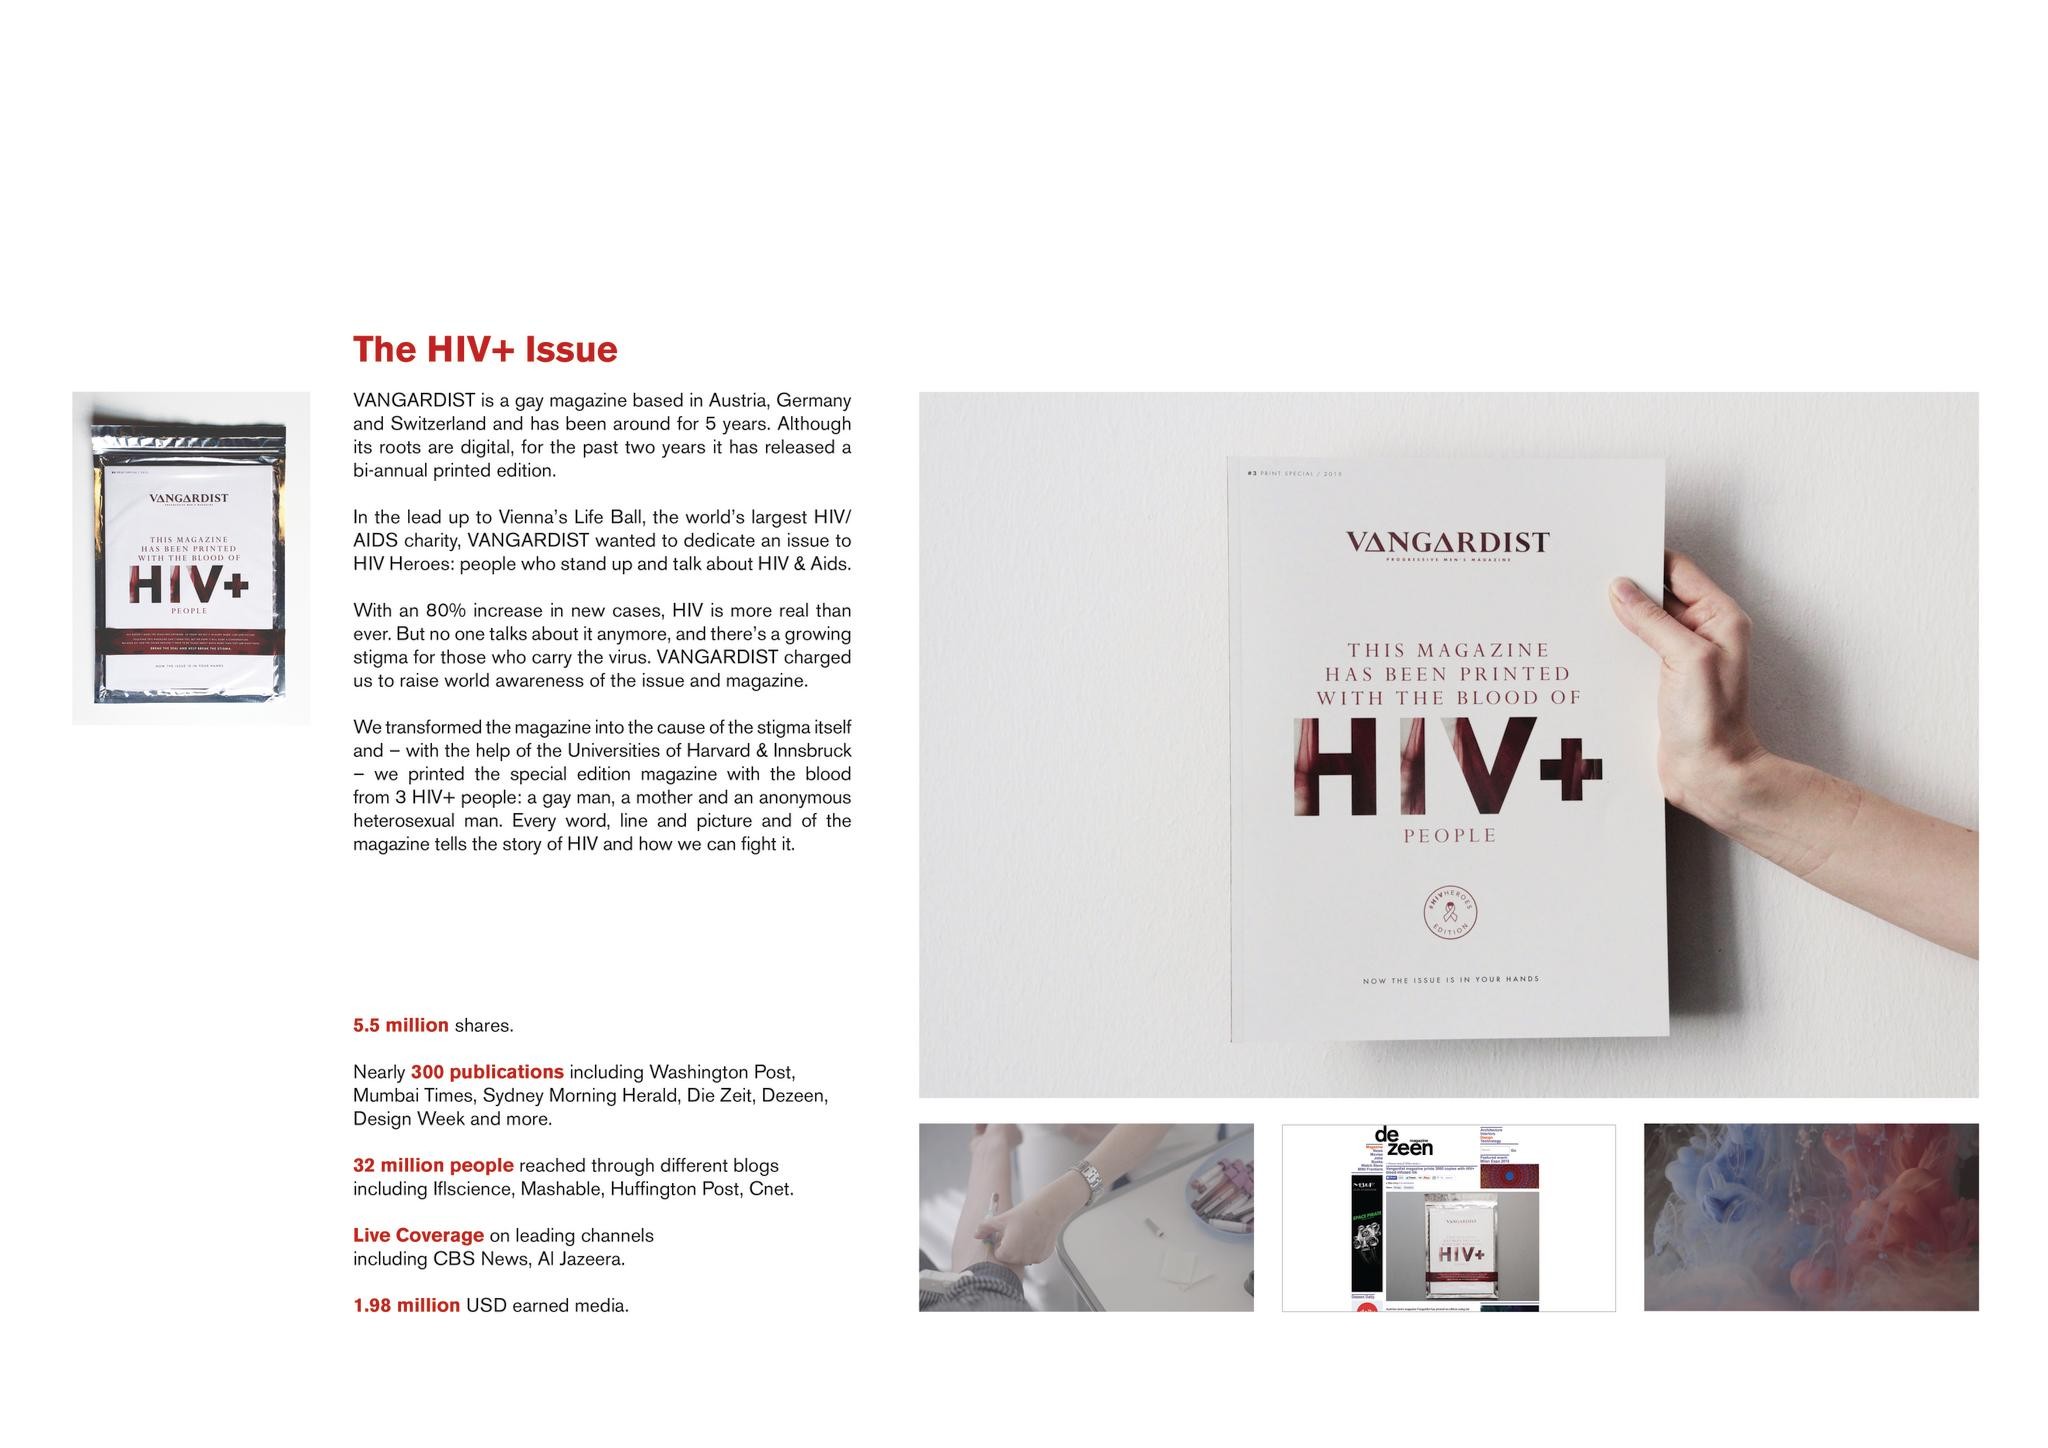 THE HIV+ ISSUE